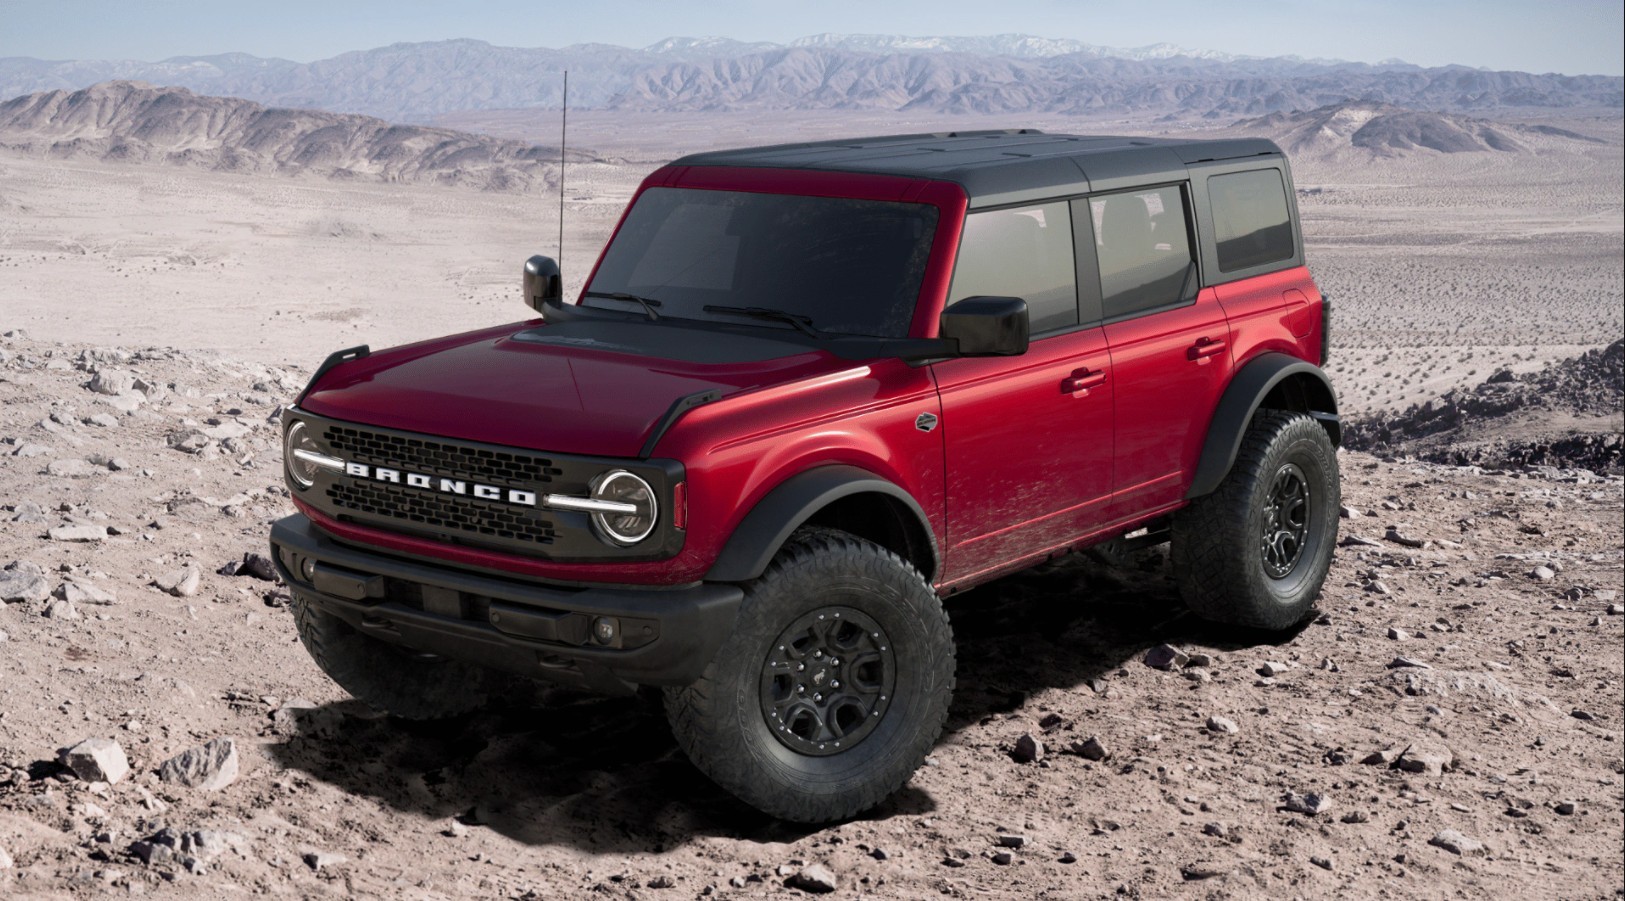 2021 Ford Bronco Build amp Price Now Live Start From 28 500 and Go Up 